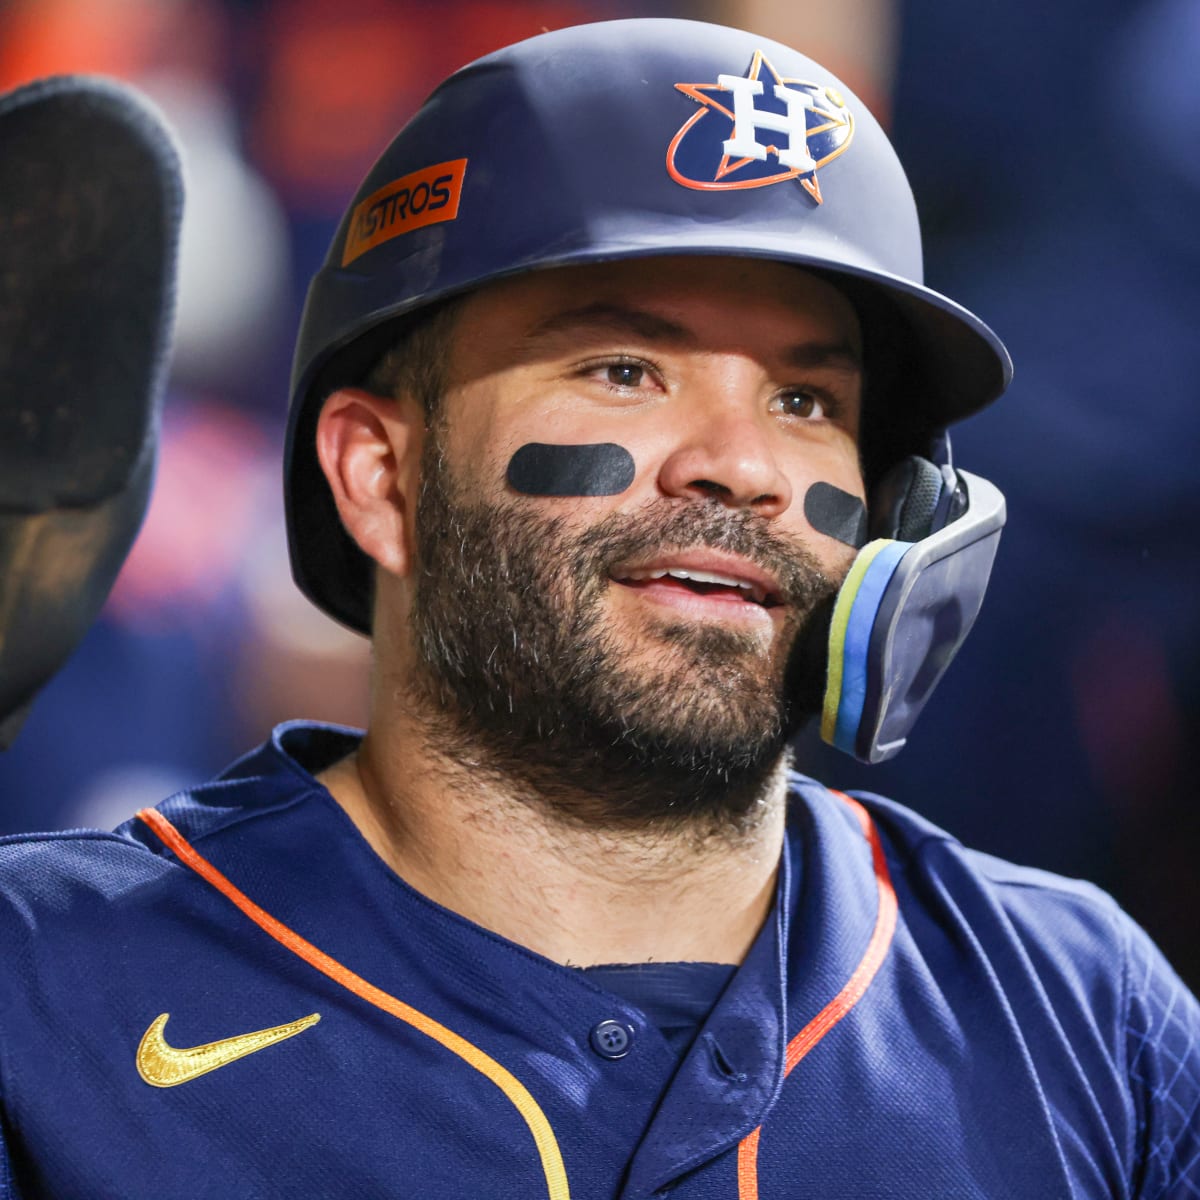 Jose Altuve named Player of the Year by fellow MLB players